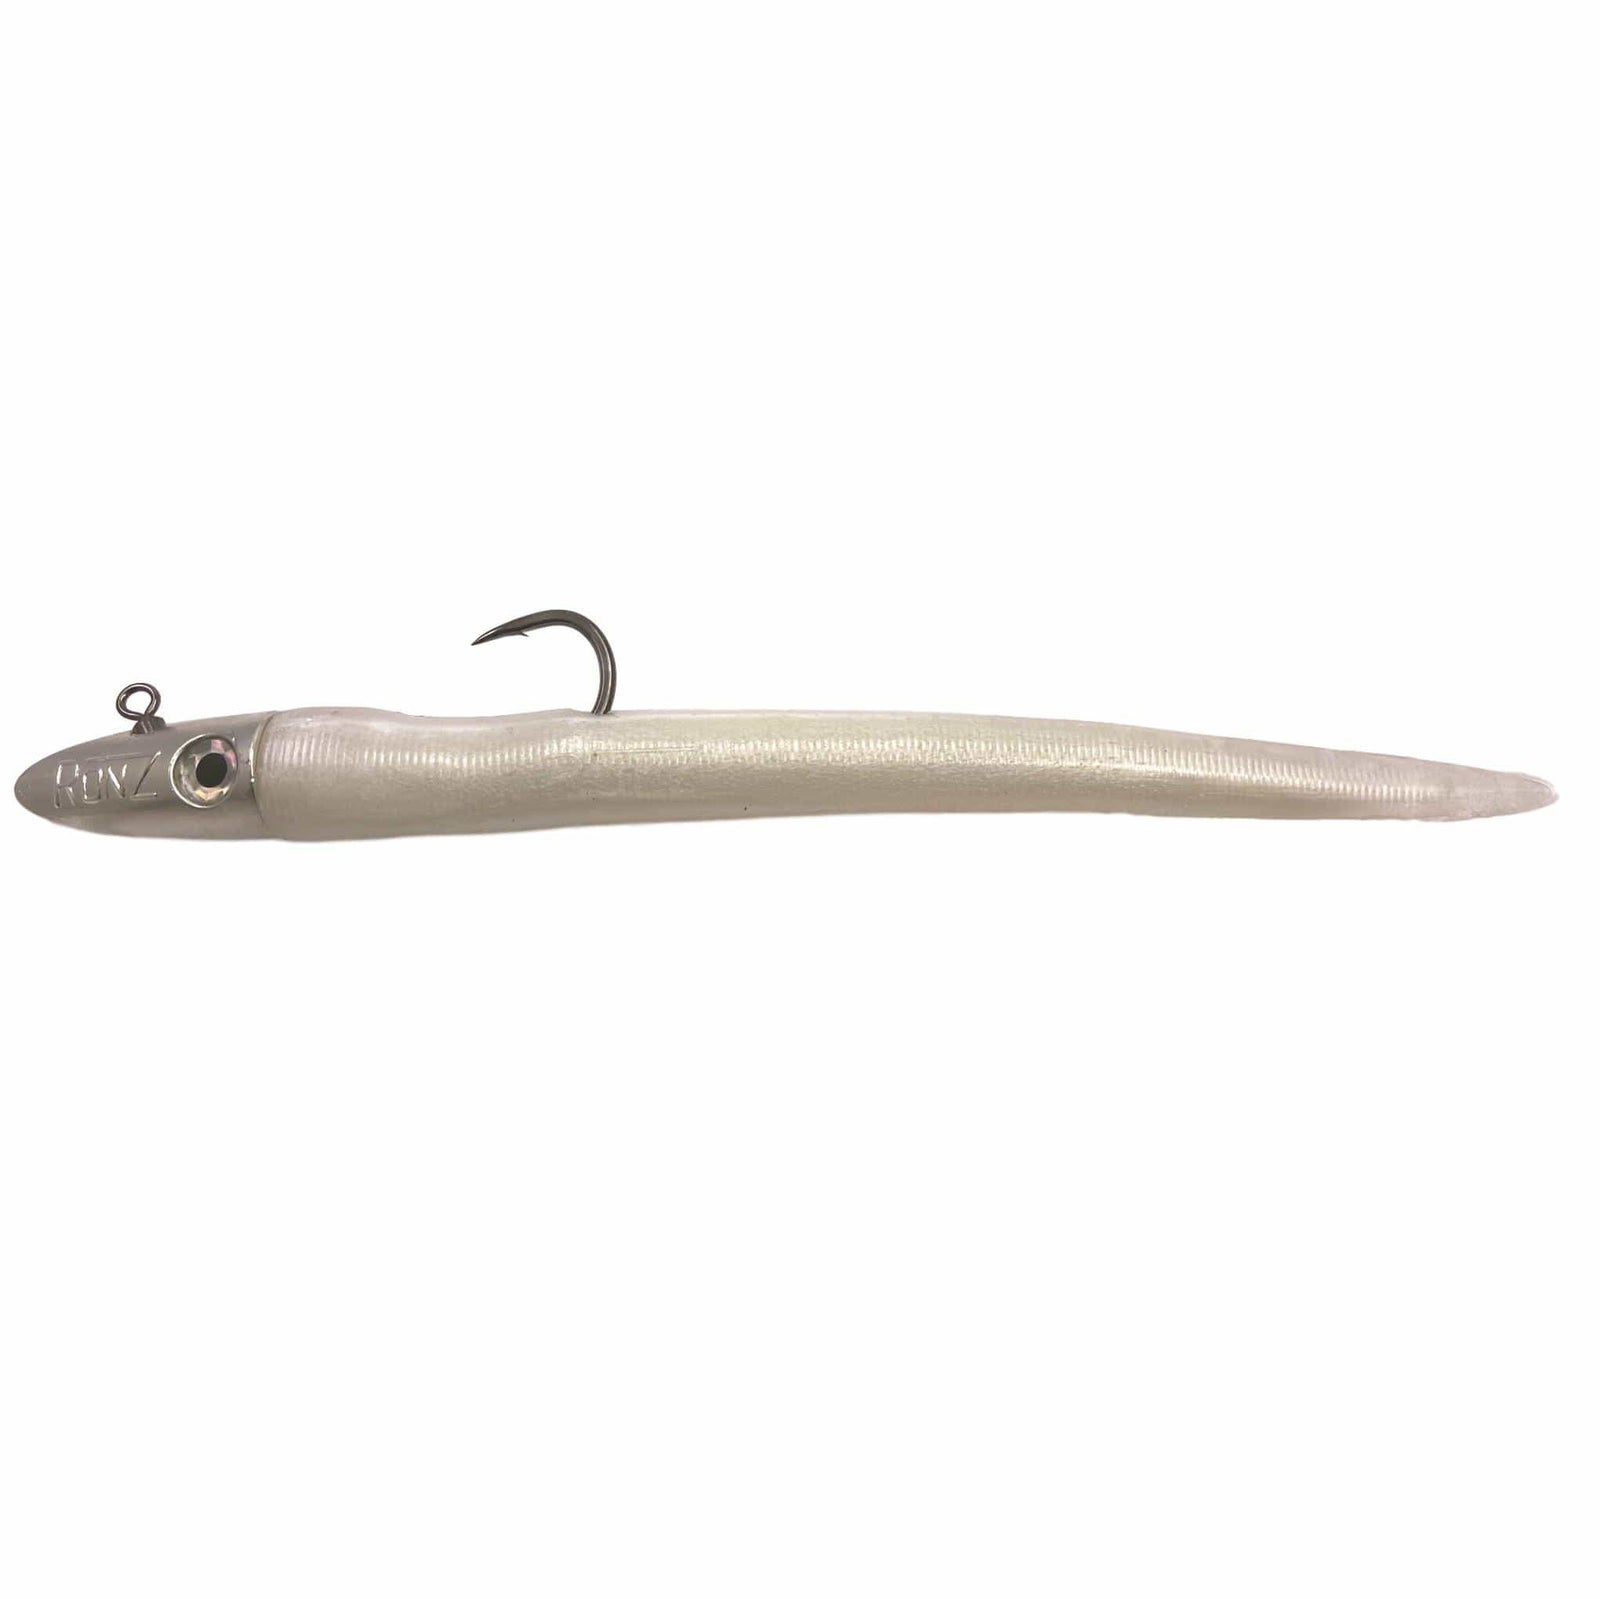 RonZ Lures - The Saltwater Edge